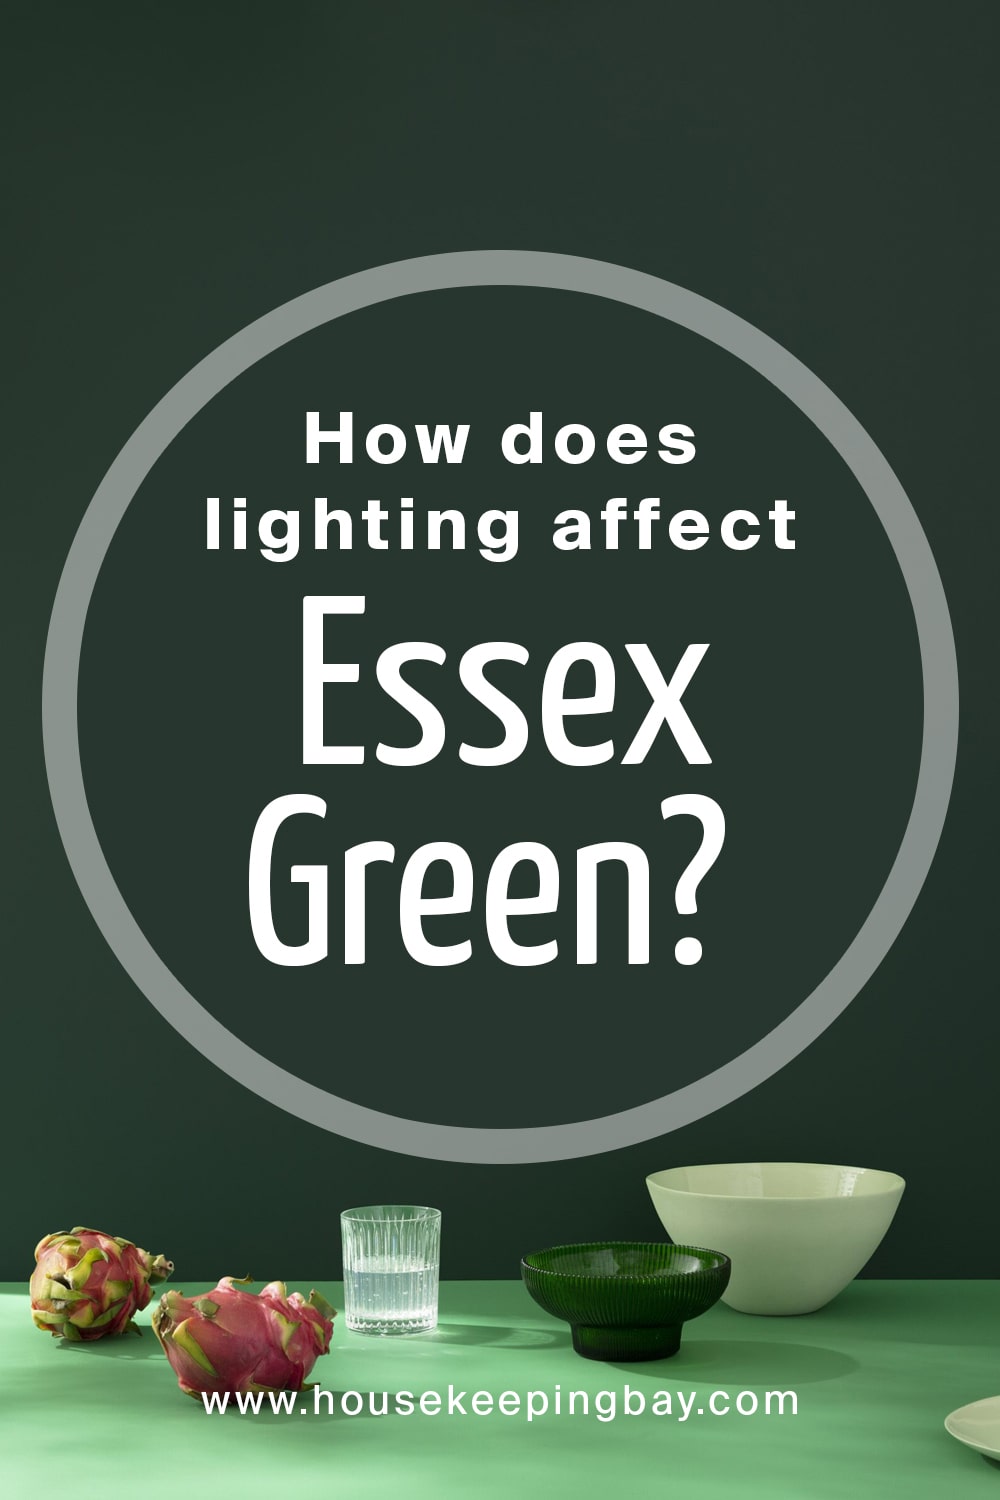 How does lighting affect Essex Green